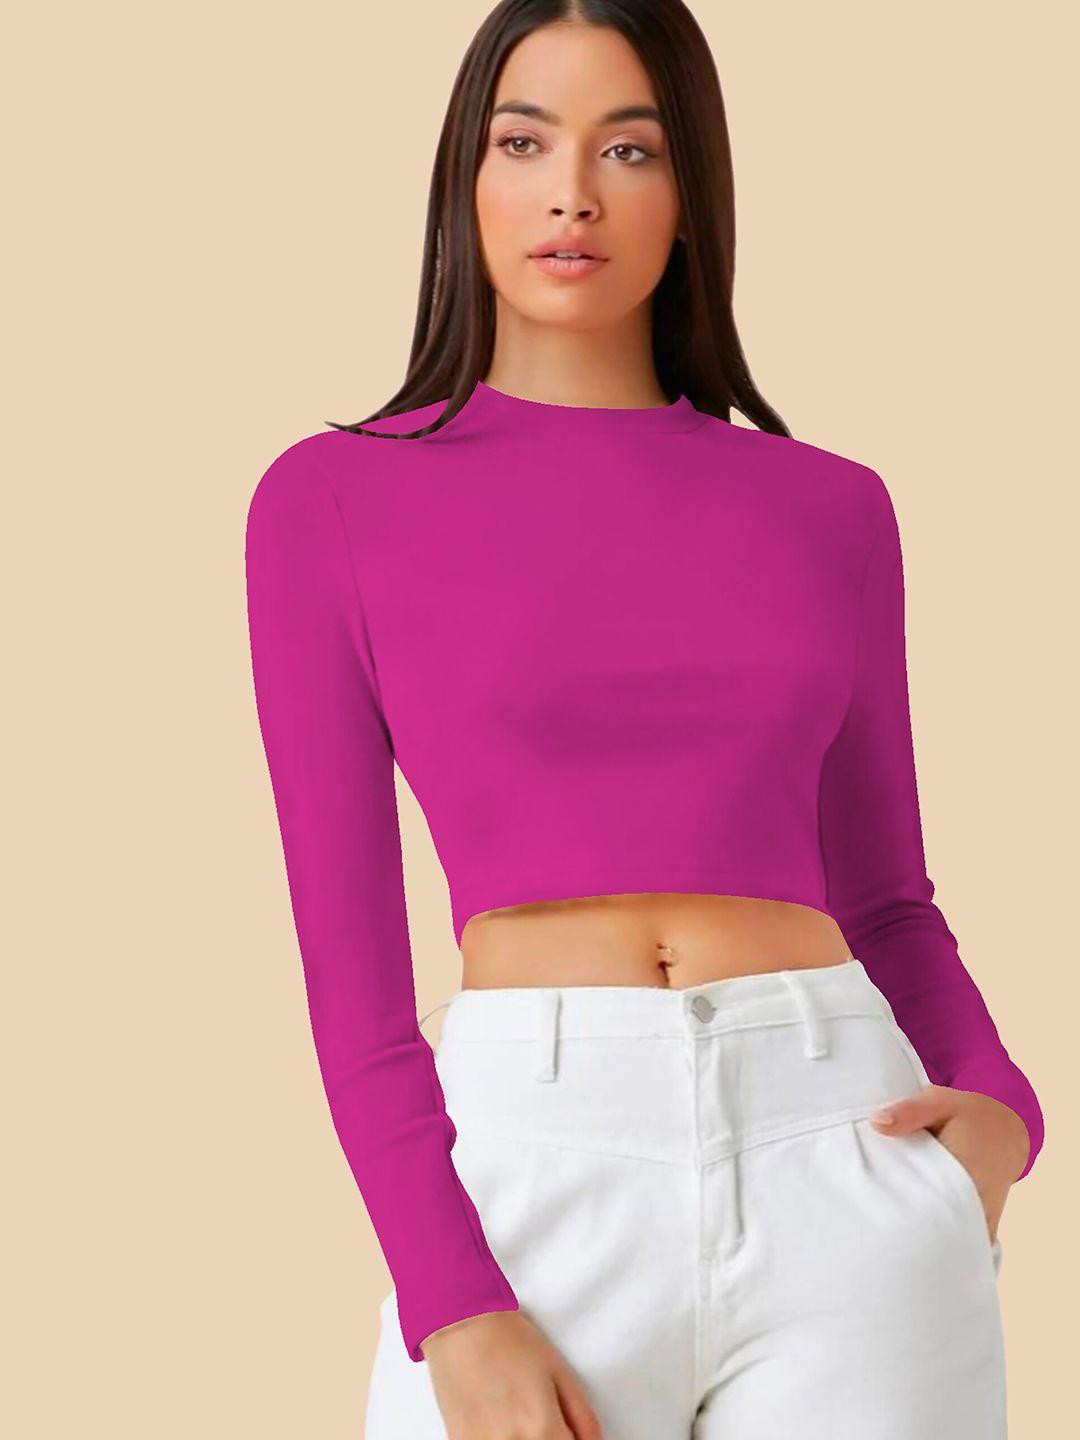 dream-beauty-fashion-round-neck-long-sleeves-fitted-crop-top